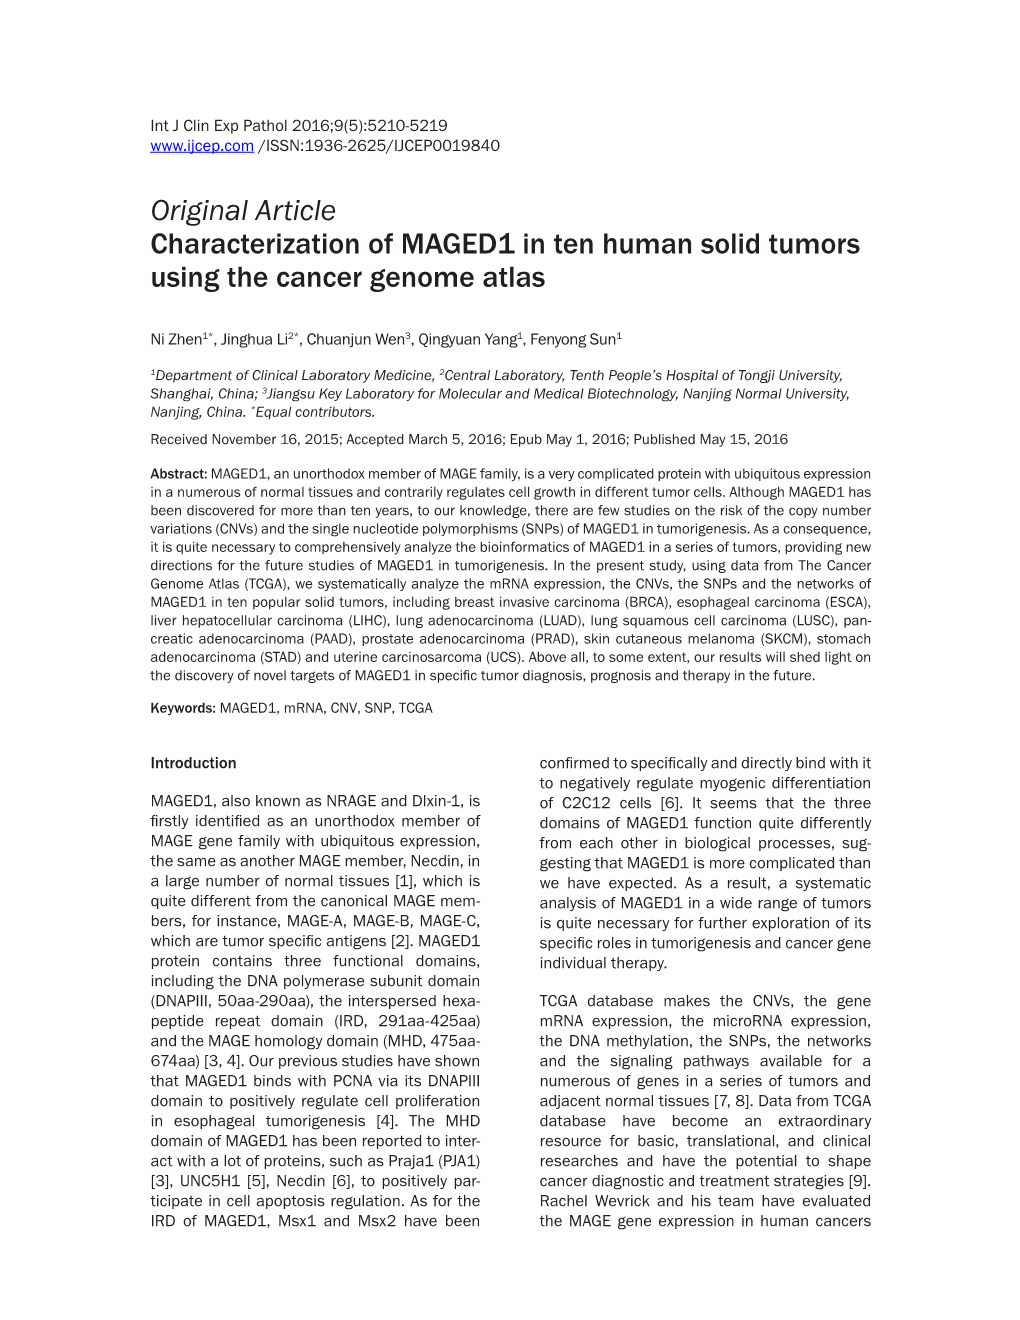 Original Article Characterization of MAGED1 in Ten Human Solid Tumors Using the Cancer Genome Atlas